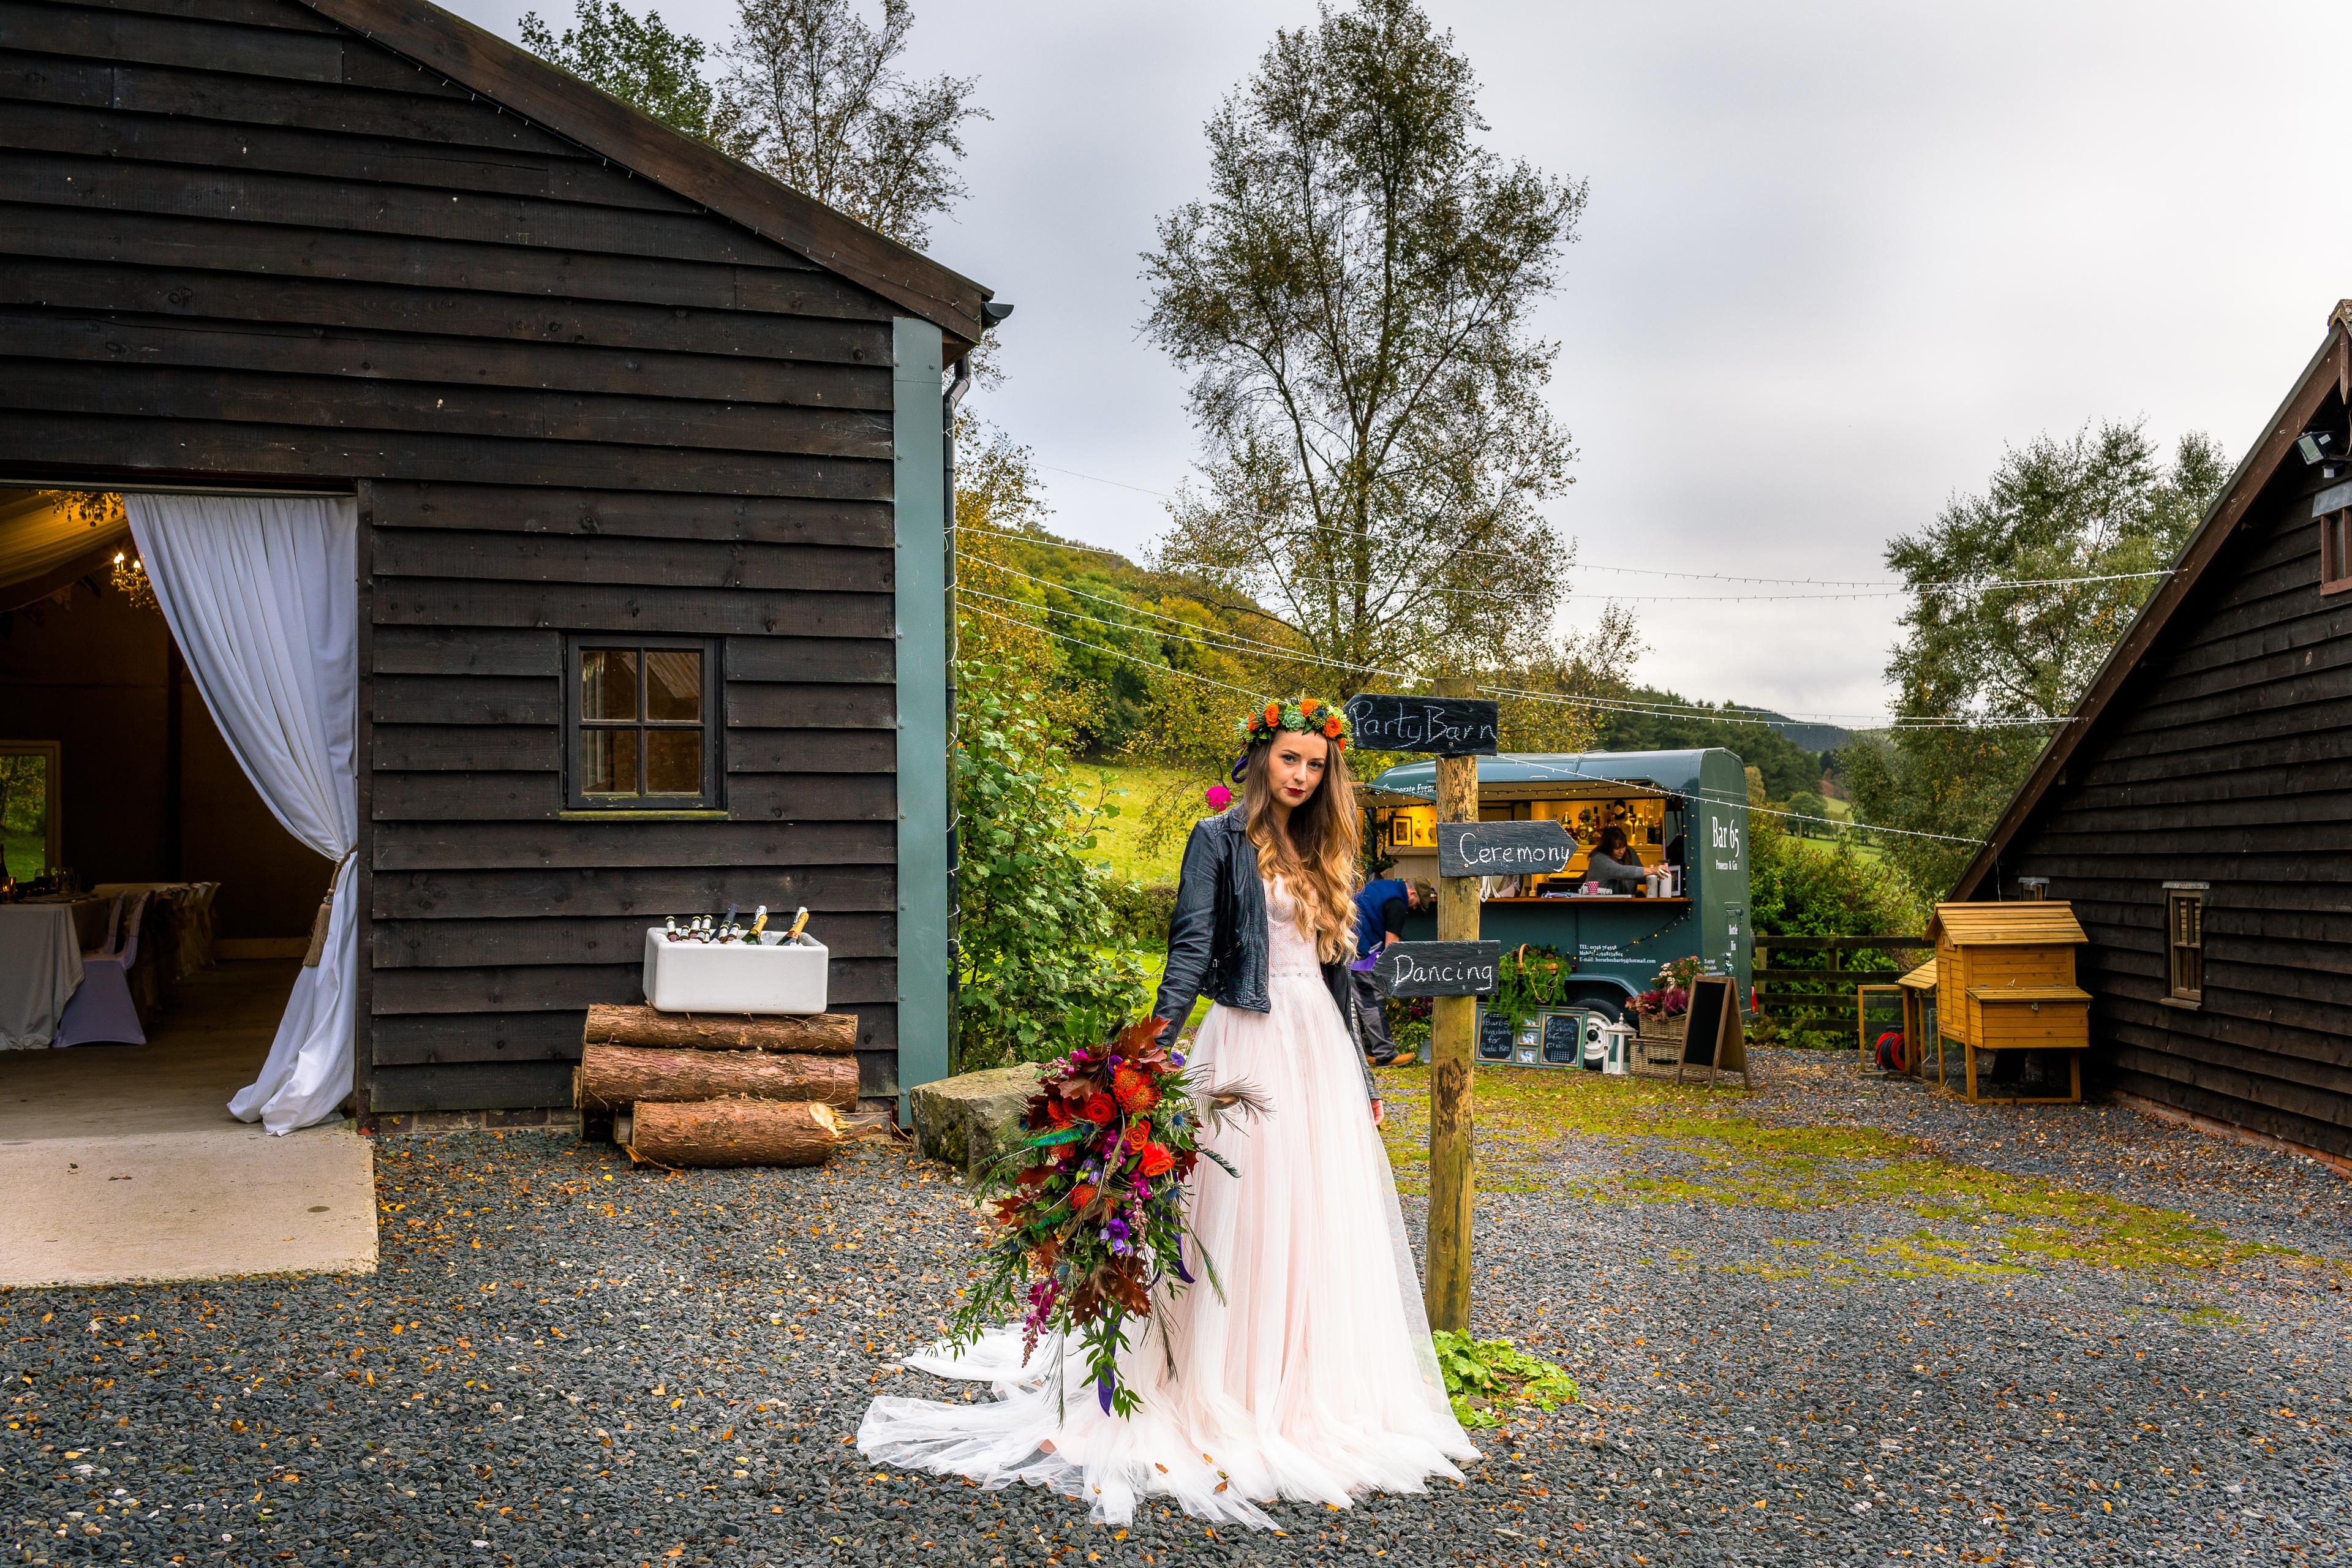 Glyngynwydd Wedding Barn And Cottages, Exclusive Hire photo #1